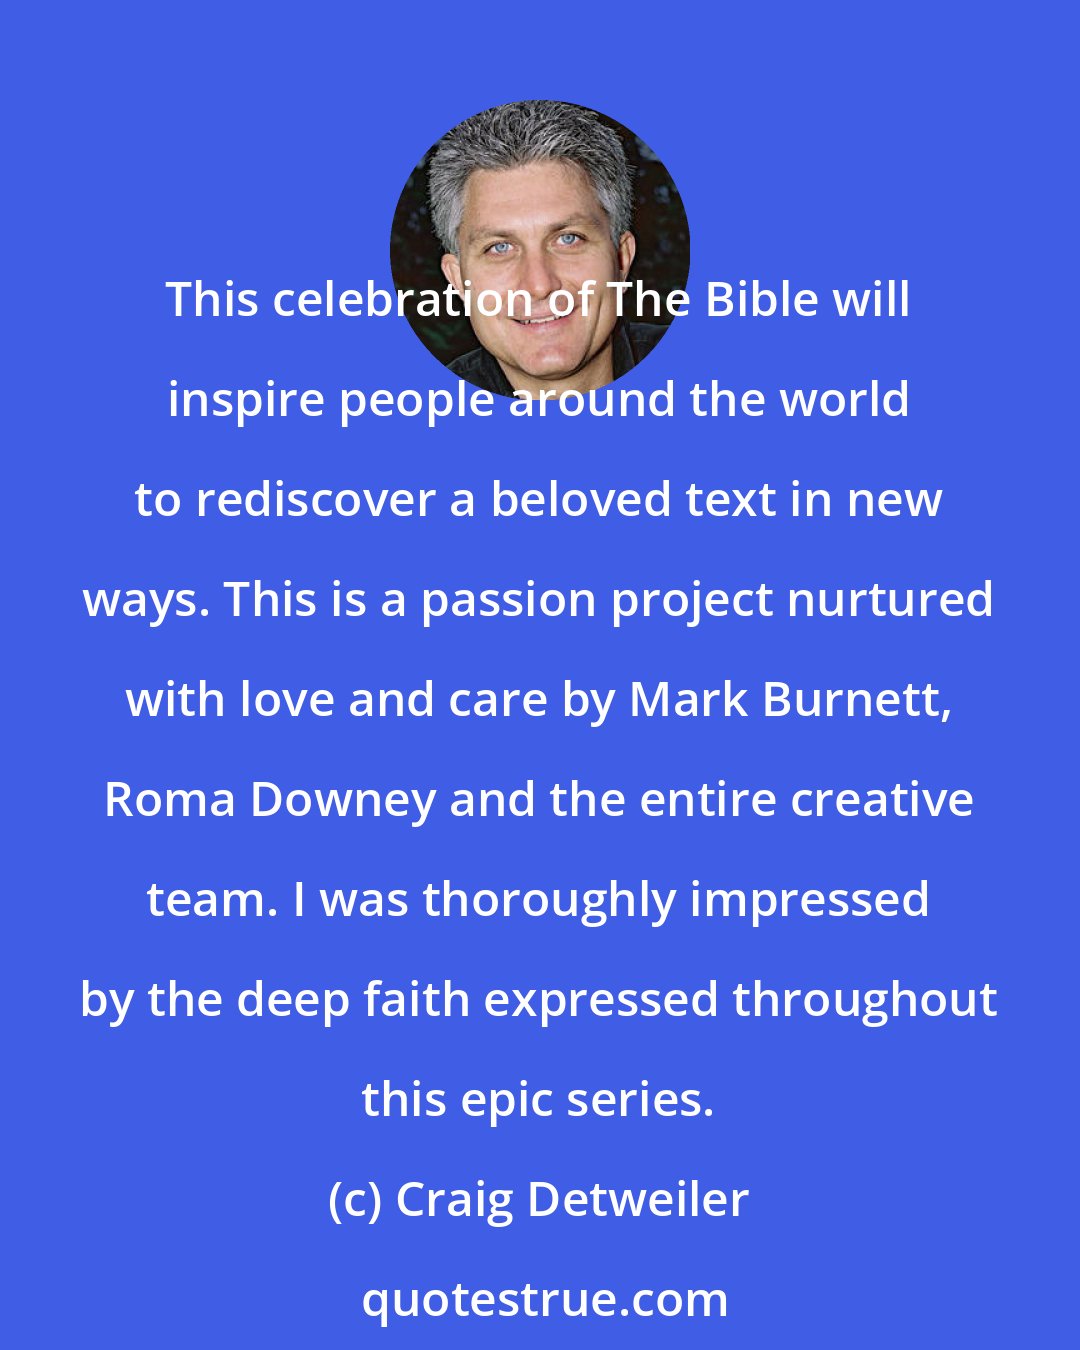 Craig Detweiler: This celebration of The Bible will inspire people around the world to rediscover a beloved text in new ways. This is a passion project nurtured with love and care by Mark Burnett, Roma Downey and the entire creative team. I was thoroughly impressed by the deep faith expressed throughout this epic series.